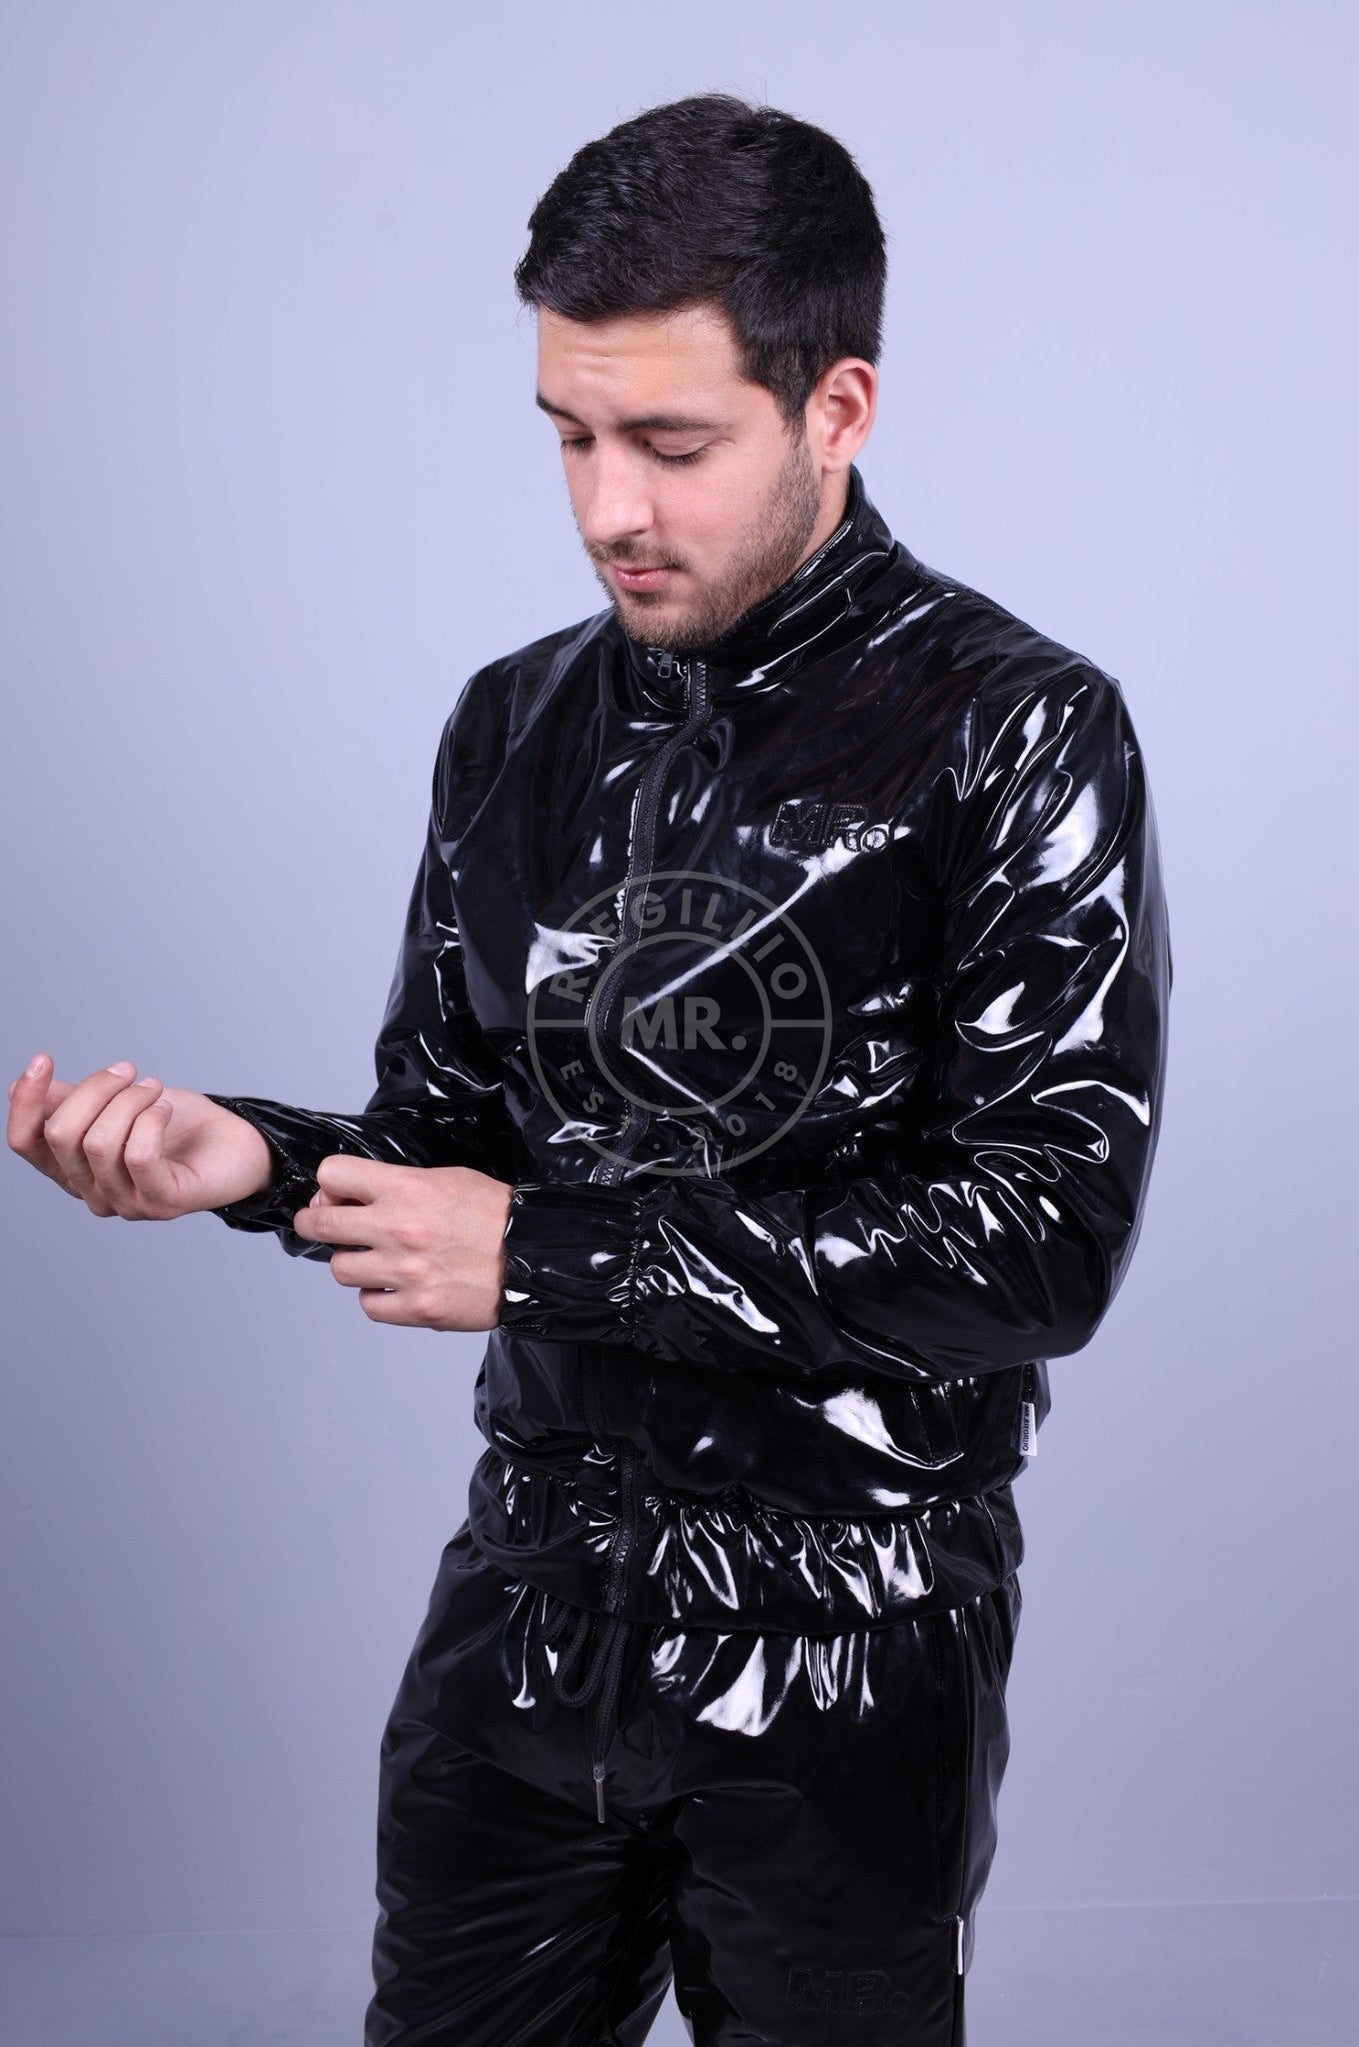 MR. ECO PVC In&Out Tracksuit Jacket